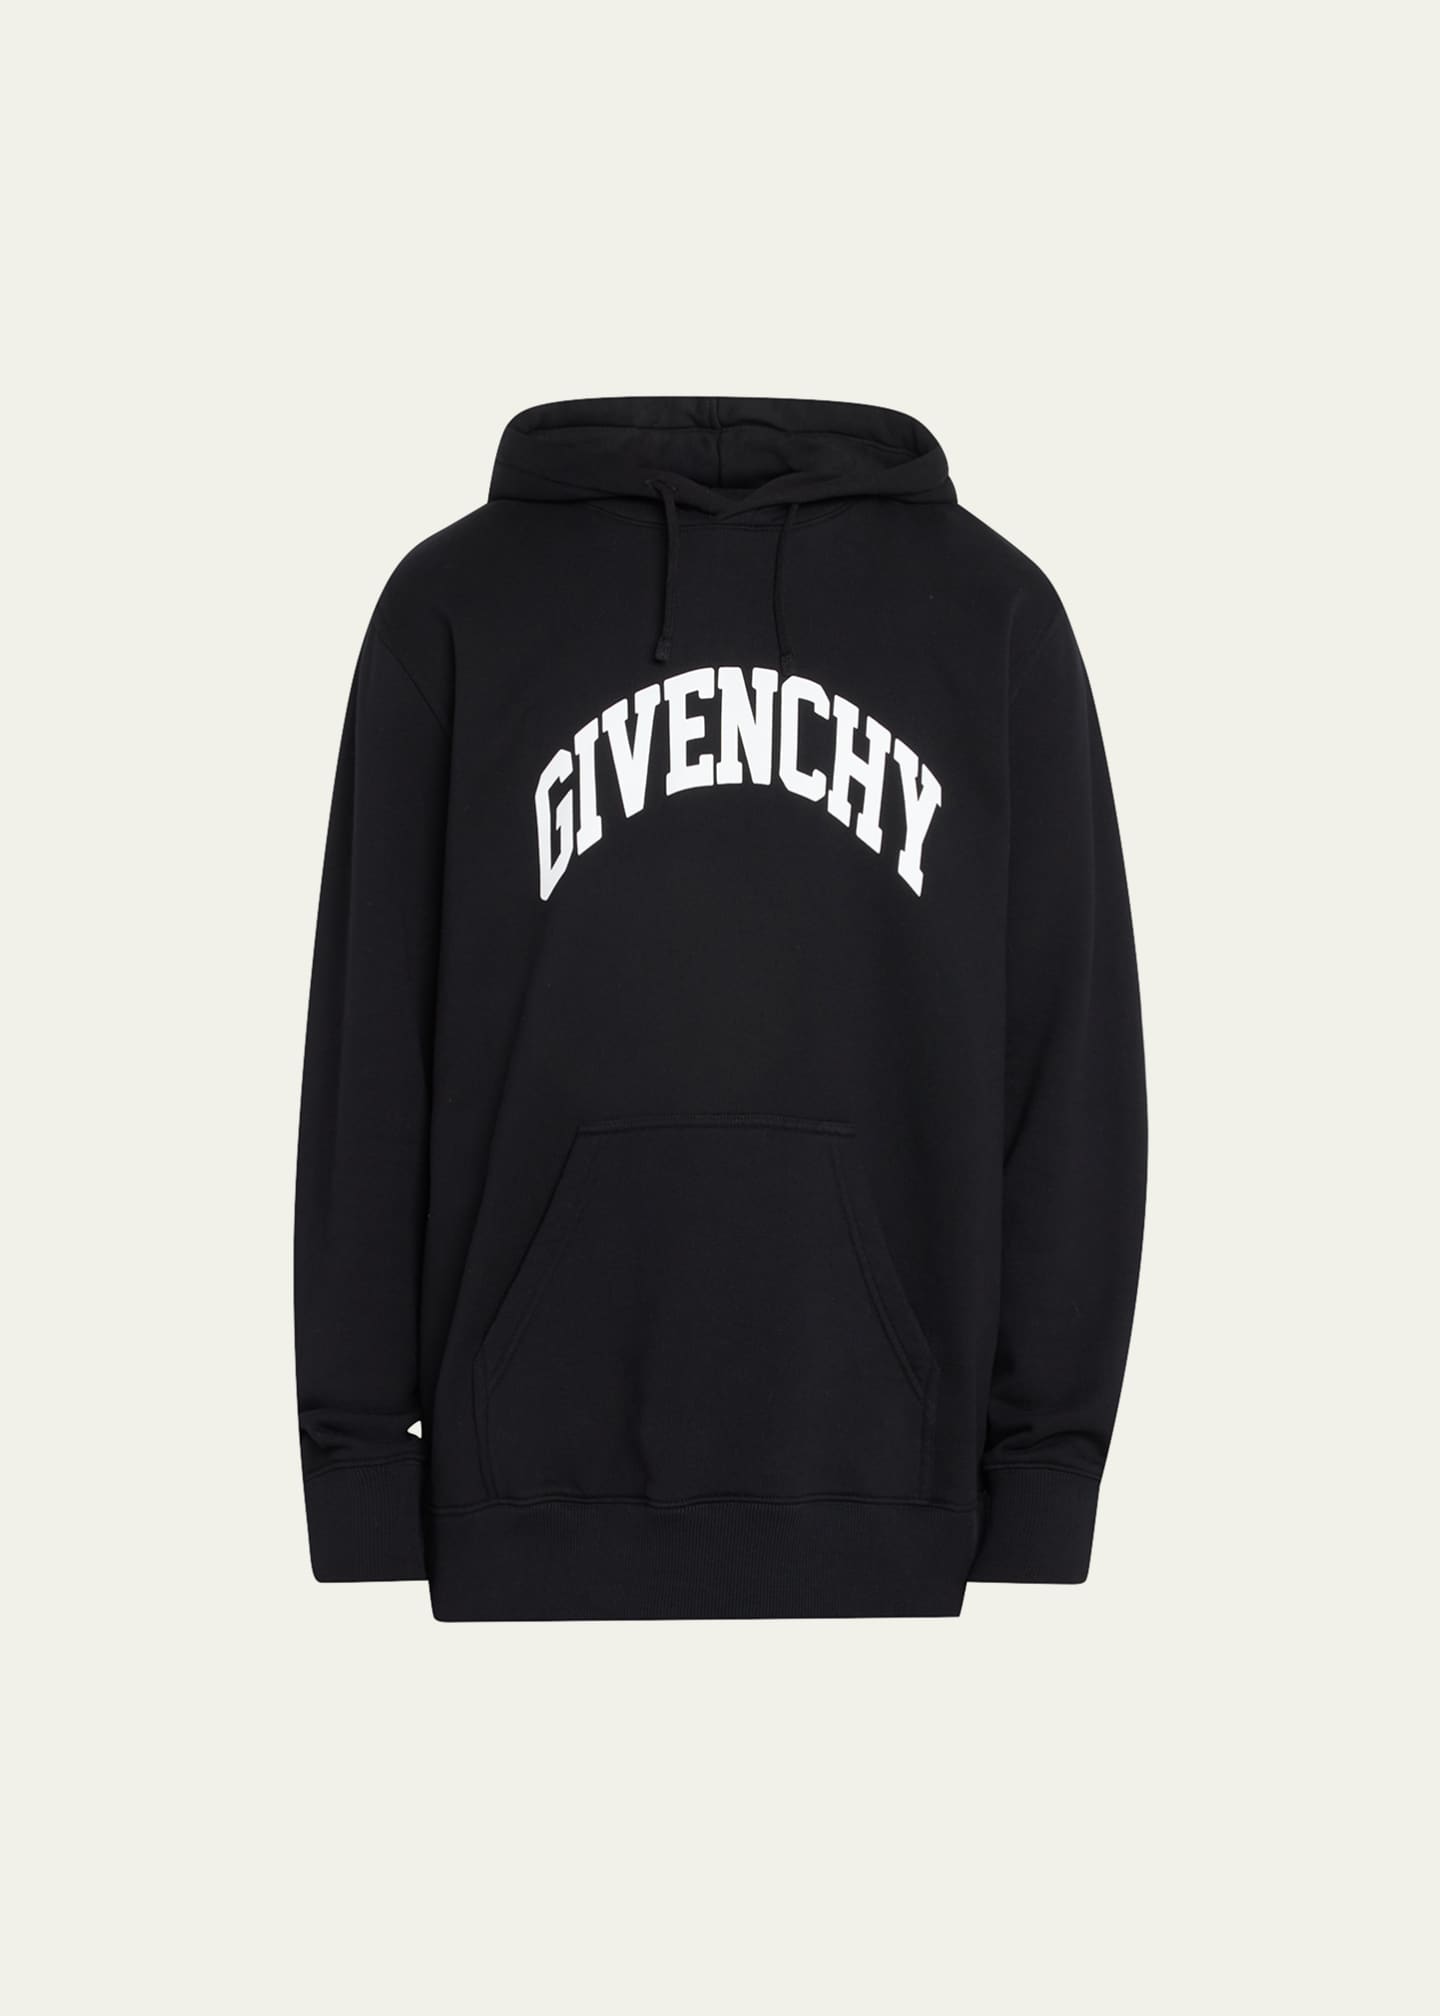 Givenchy Men's Classic-Fit Logo Hoodie - Bergdorf Goodman